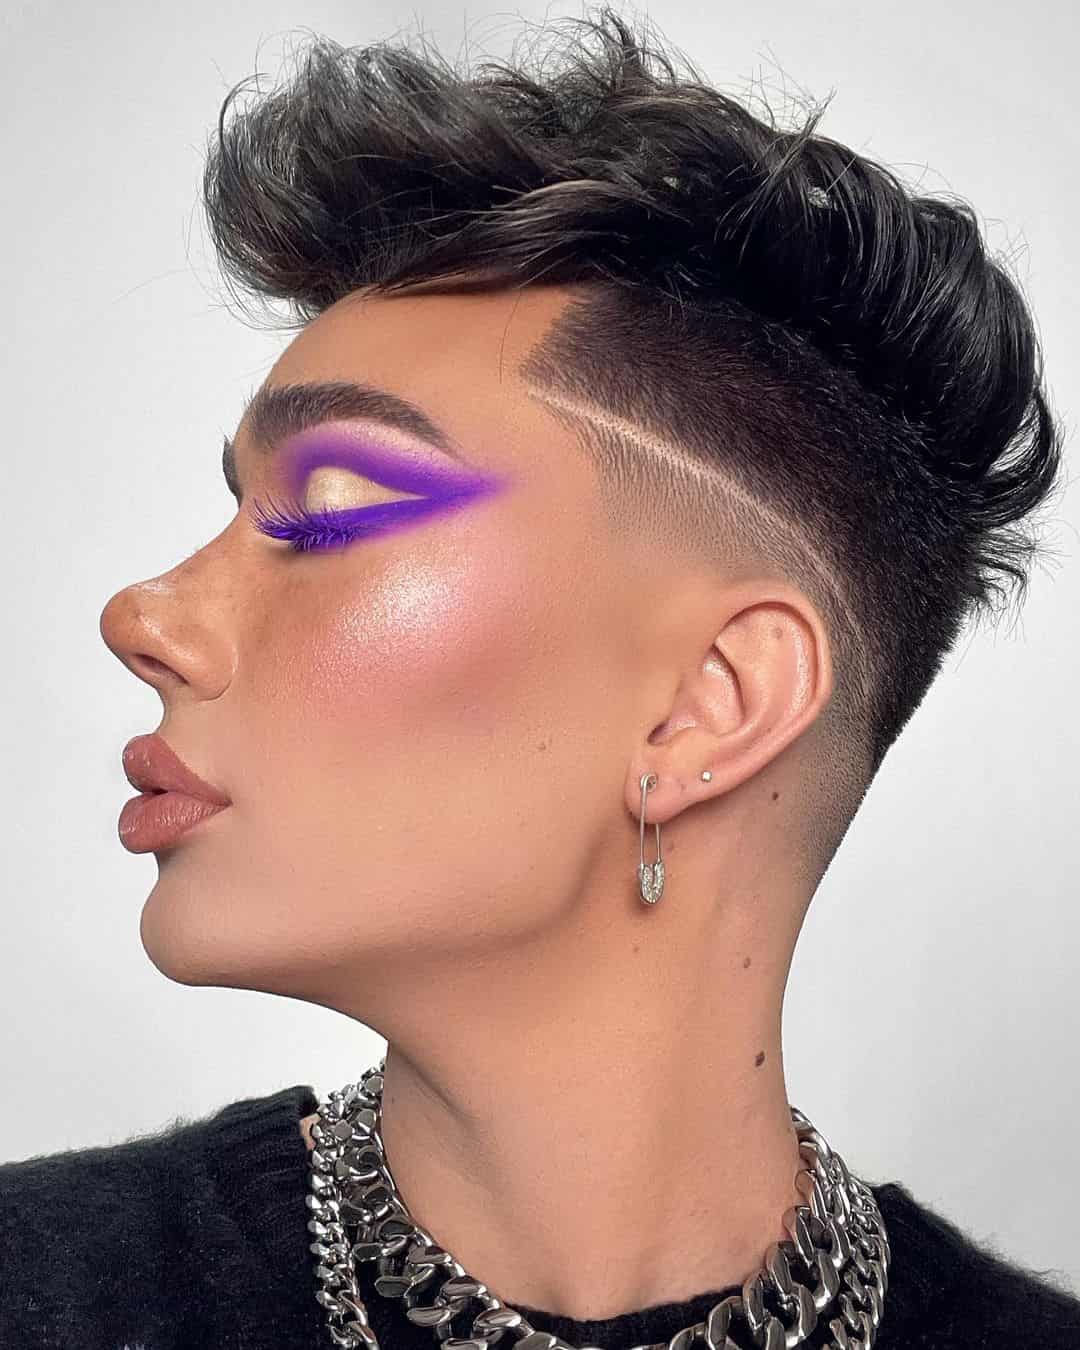 James Charles - Biography, Profile, Facts, and Career